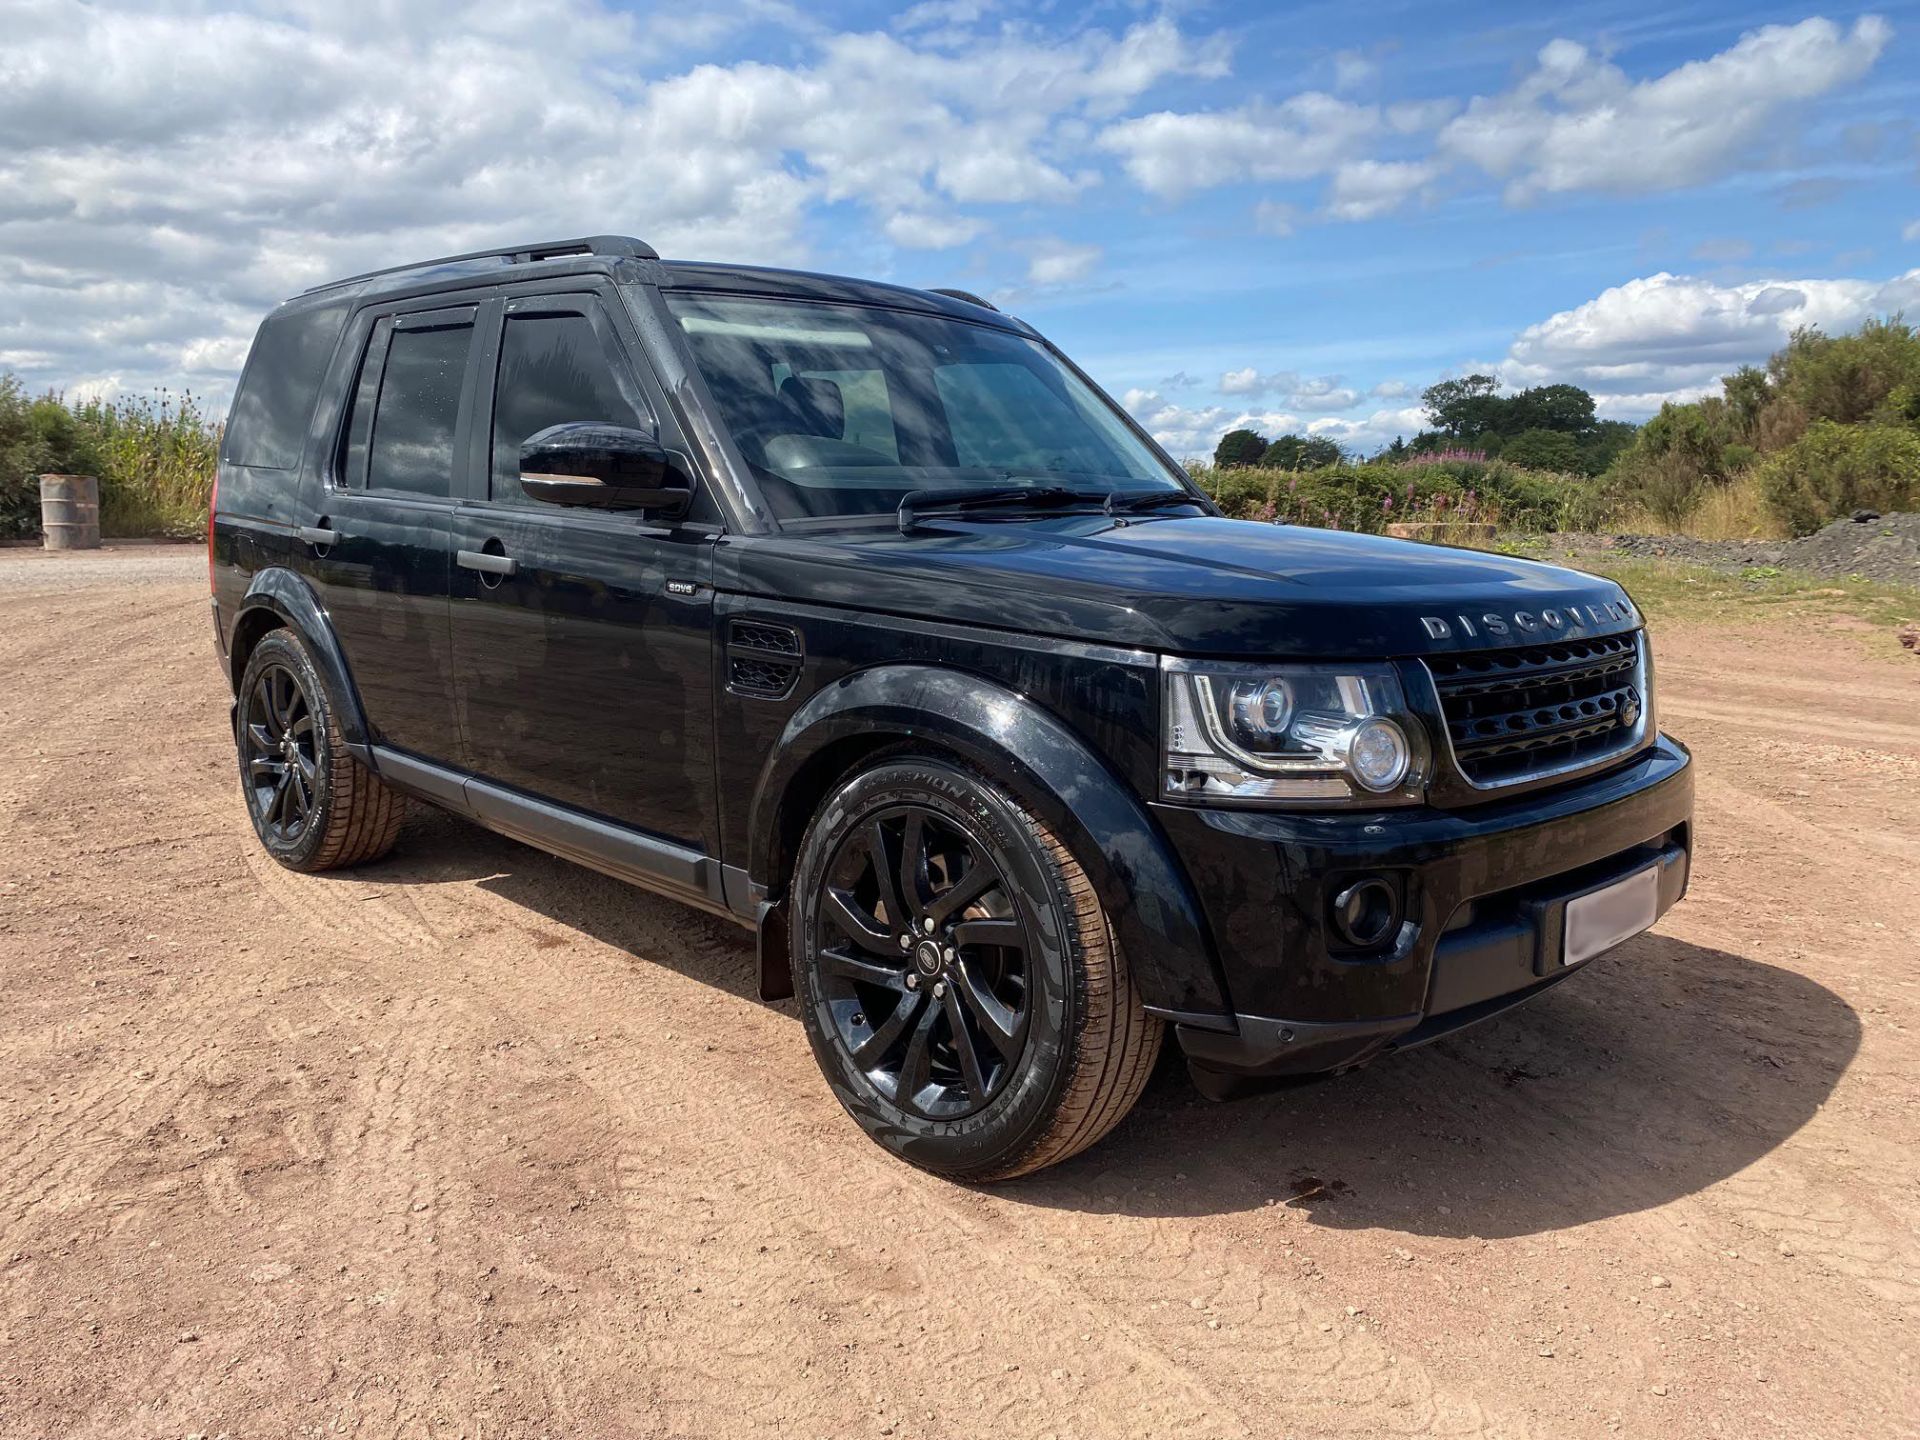 2015 LAND ROVER DISCOVERY XS SDV6 AUTO BLACK CONVERTED COMMERCIAL – WITH REAR SEAT CONVERSION